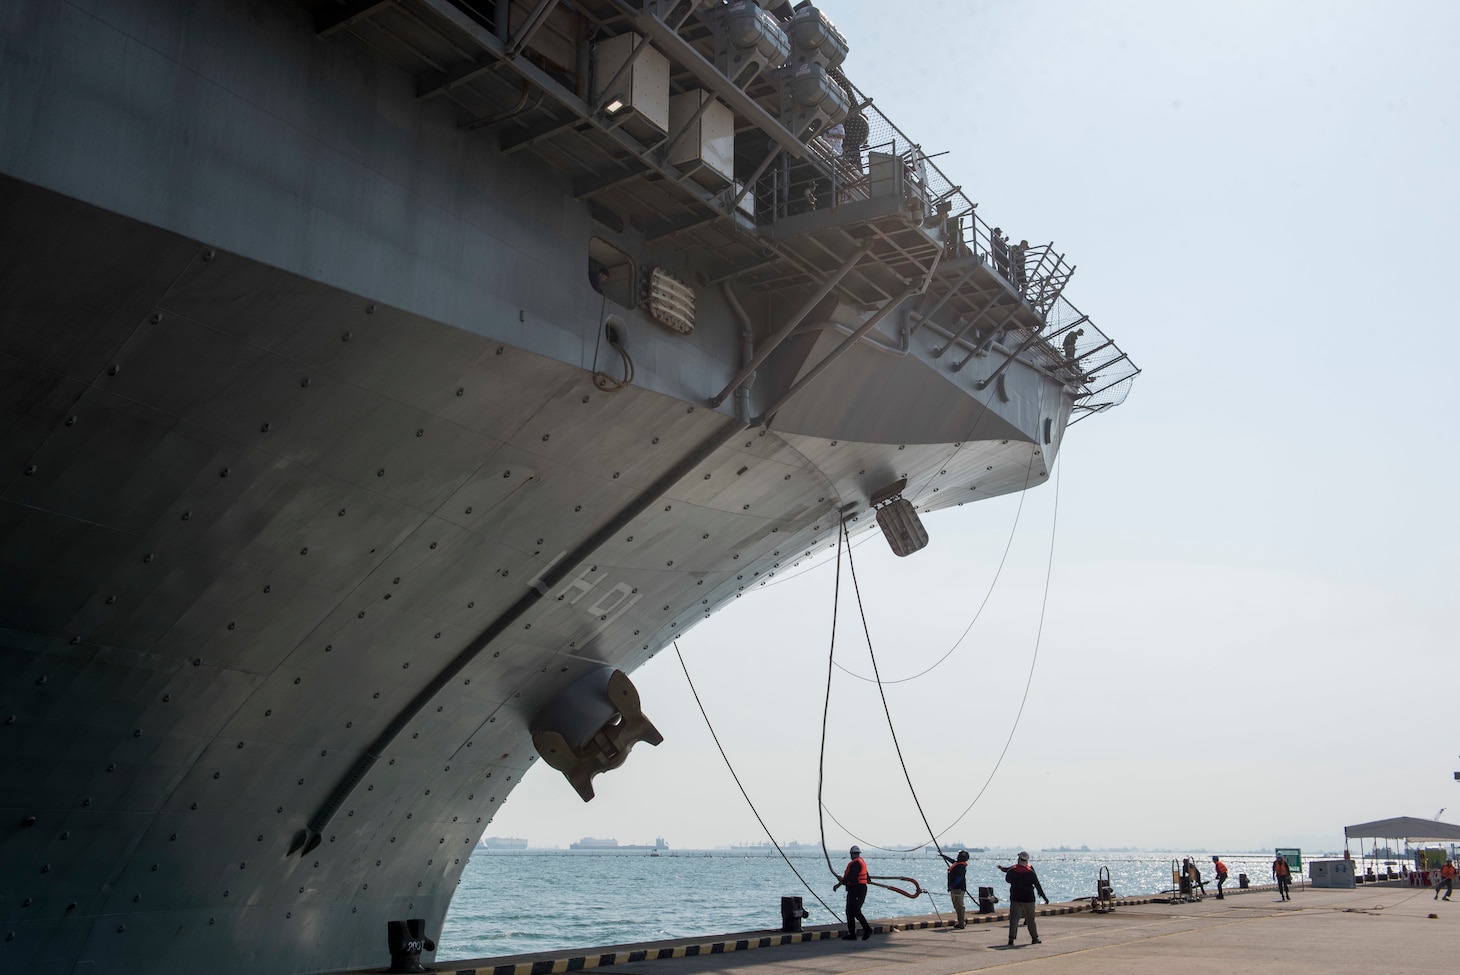 CHANGI NAVAL BASE, Singapore (October 2, 2018) The amphibious assault ship USS Wasp (LHD 1) arrives at Changi Naval Base in Singapore for a port visit. Wasp, the flagship for the Wasp Amphibious Ready Group, is operating in the Indo-Pacific region to enhance amphibious capabilities with regional partners and to serve as a ready-response force for any type of contingency.